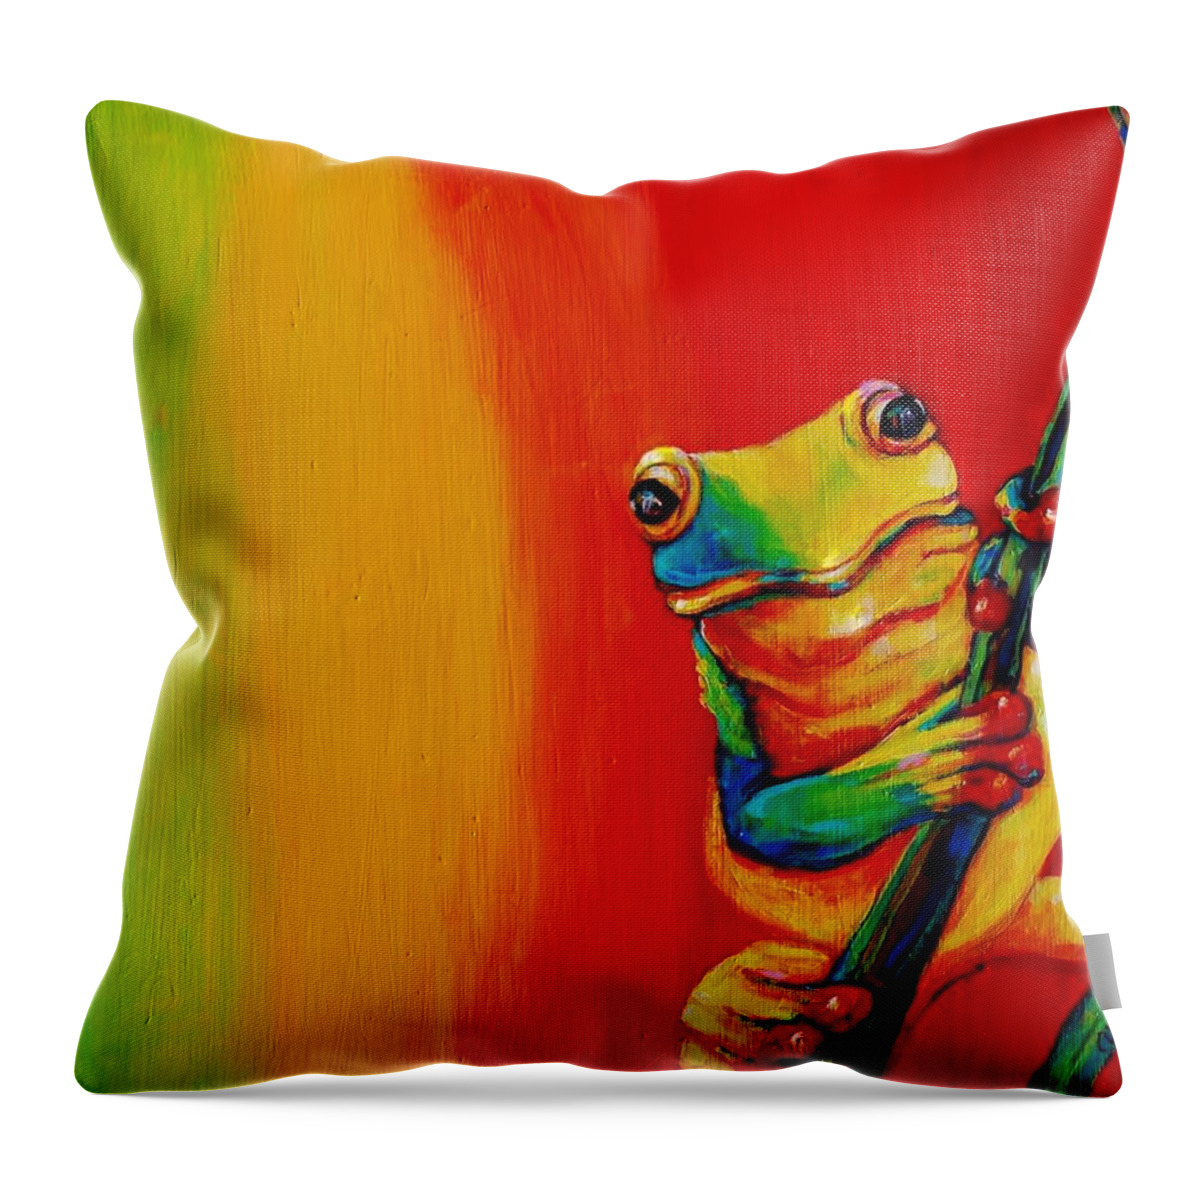 Frog Throw Pillow featuring the painting Chroma Frog by Jean Cormier